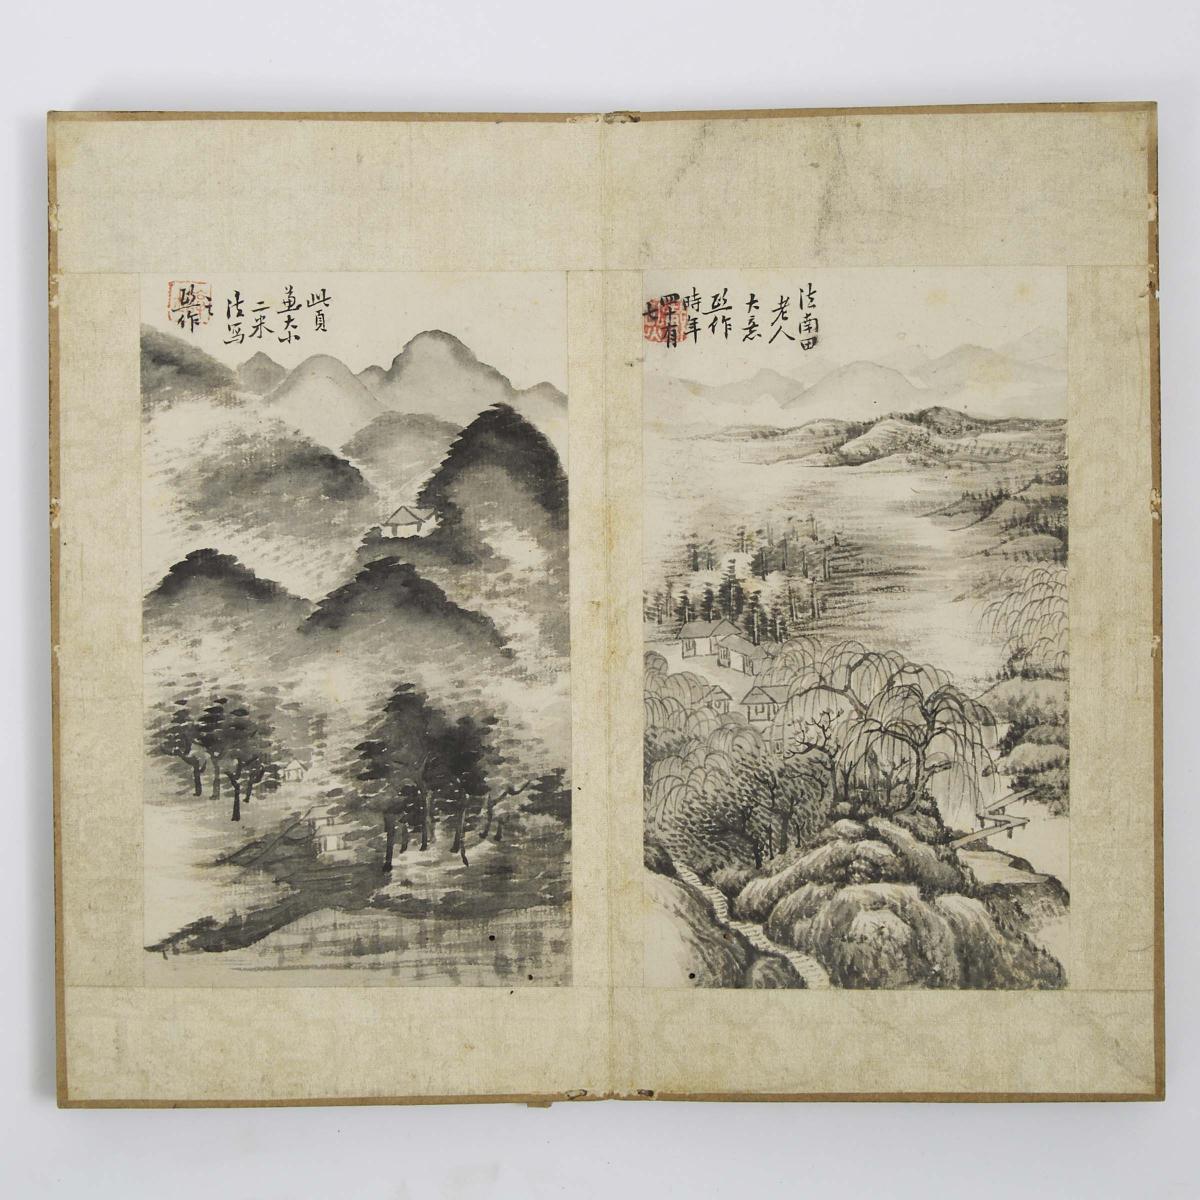 Attributed to Dai Xi (1801-1860), A Landscape Painting Album, 戴熙 (1801 – 1860) (传) 山水花卉册 十开 水墨纸本, ea - Image 4 of 8